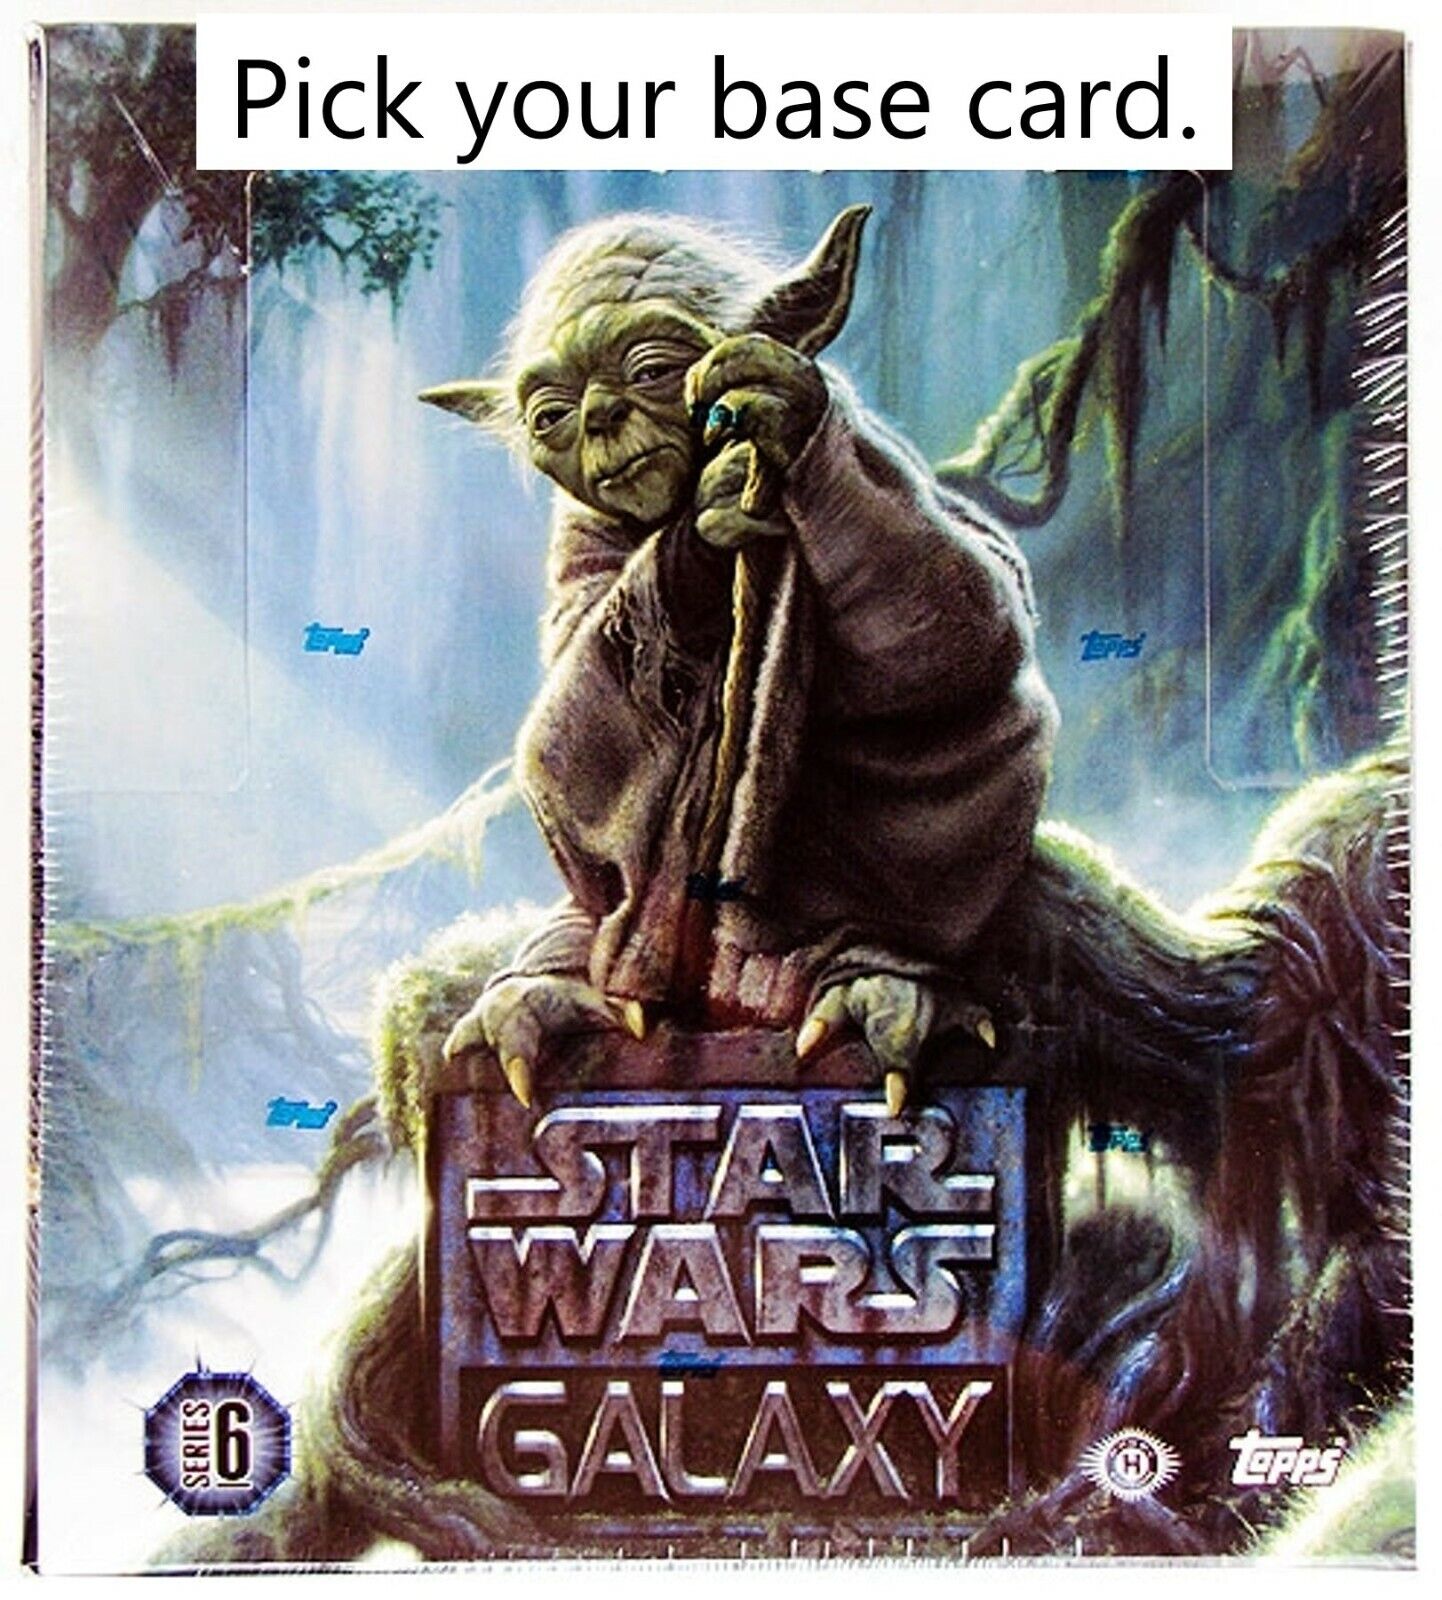 2011 Topps Star Wars Galaxy 6 Pick your base card complete your set.